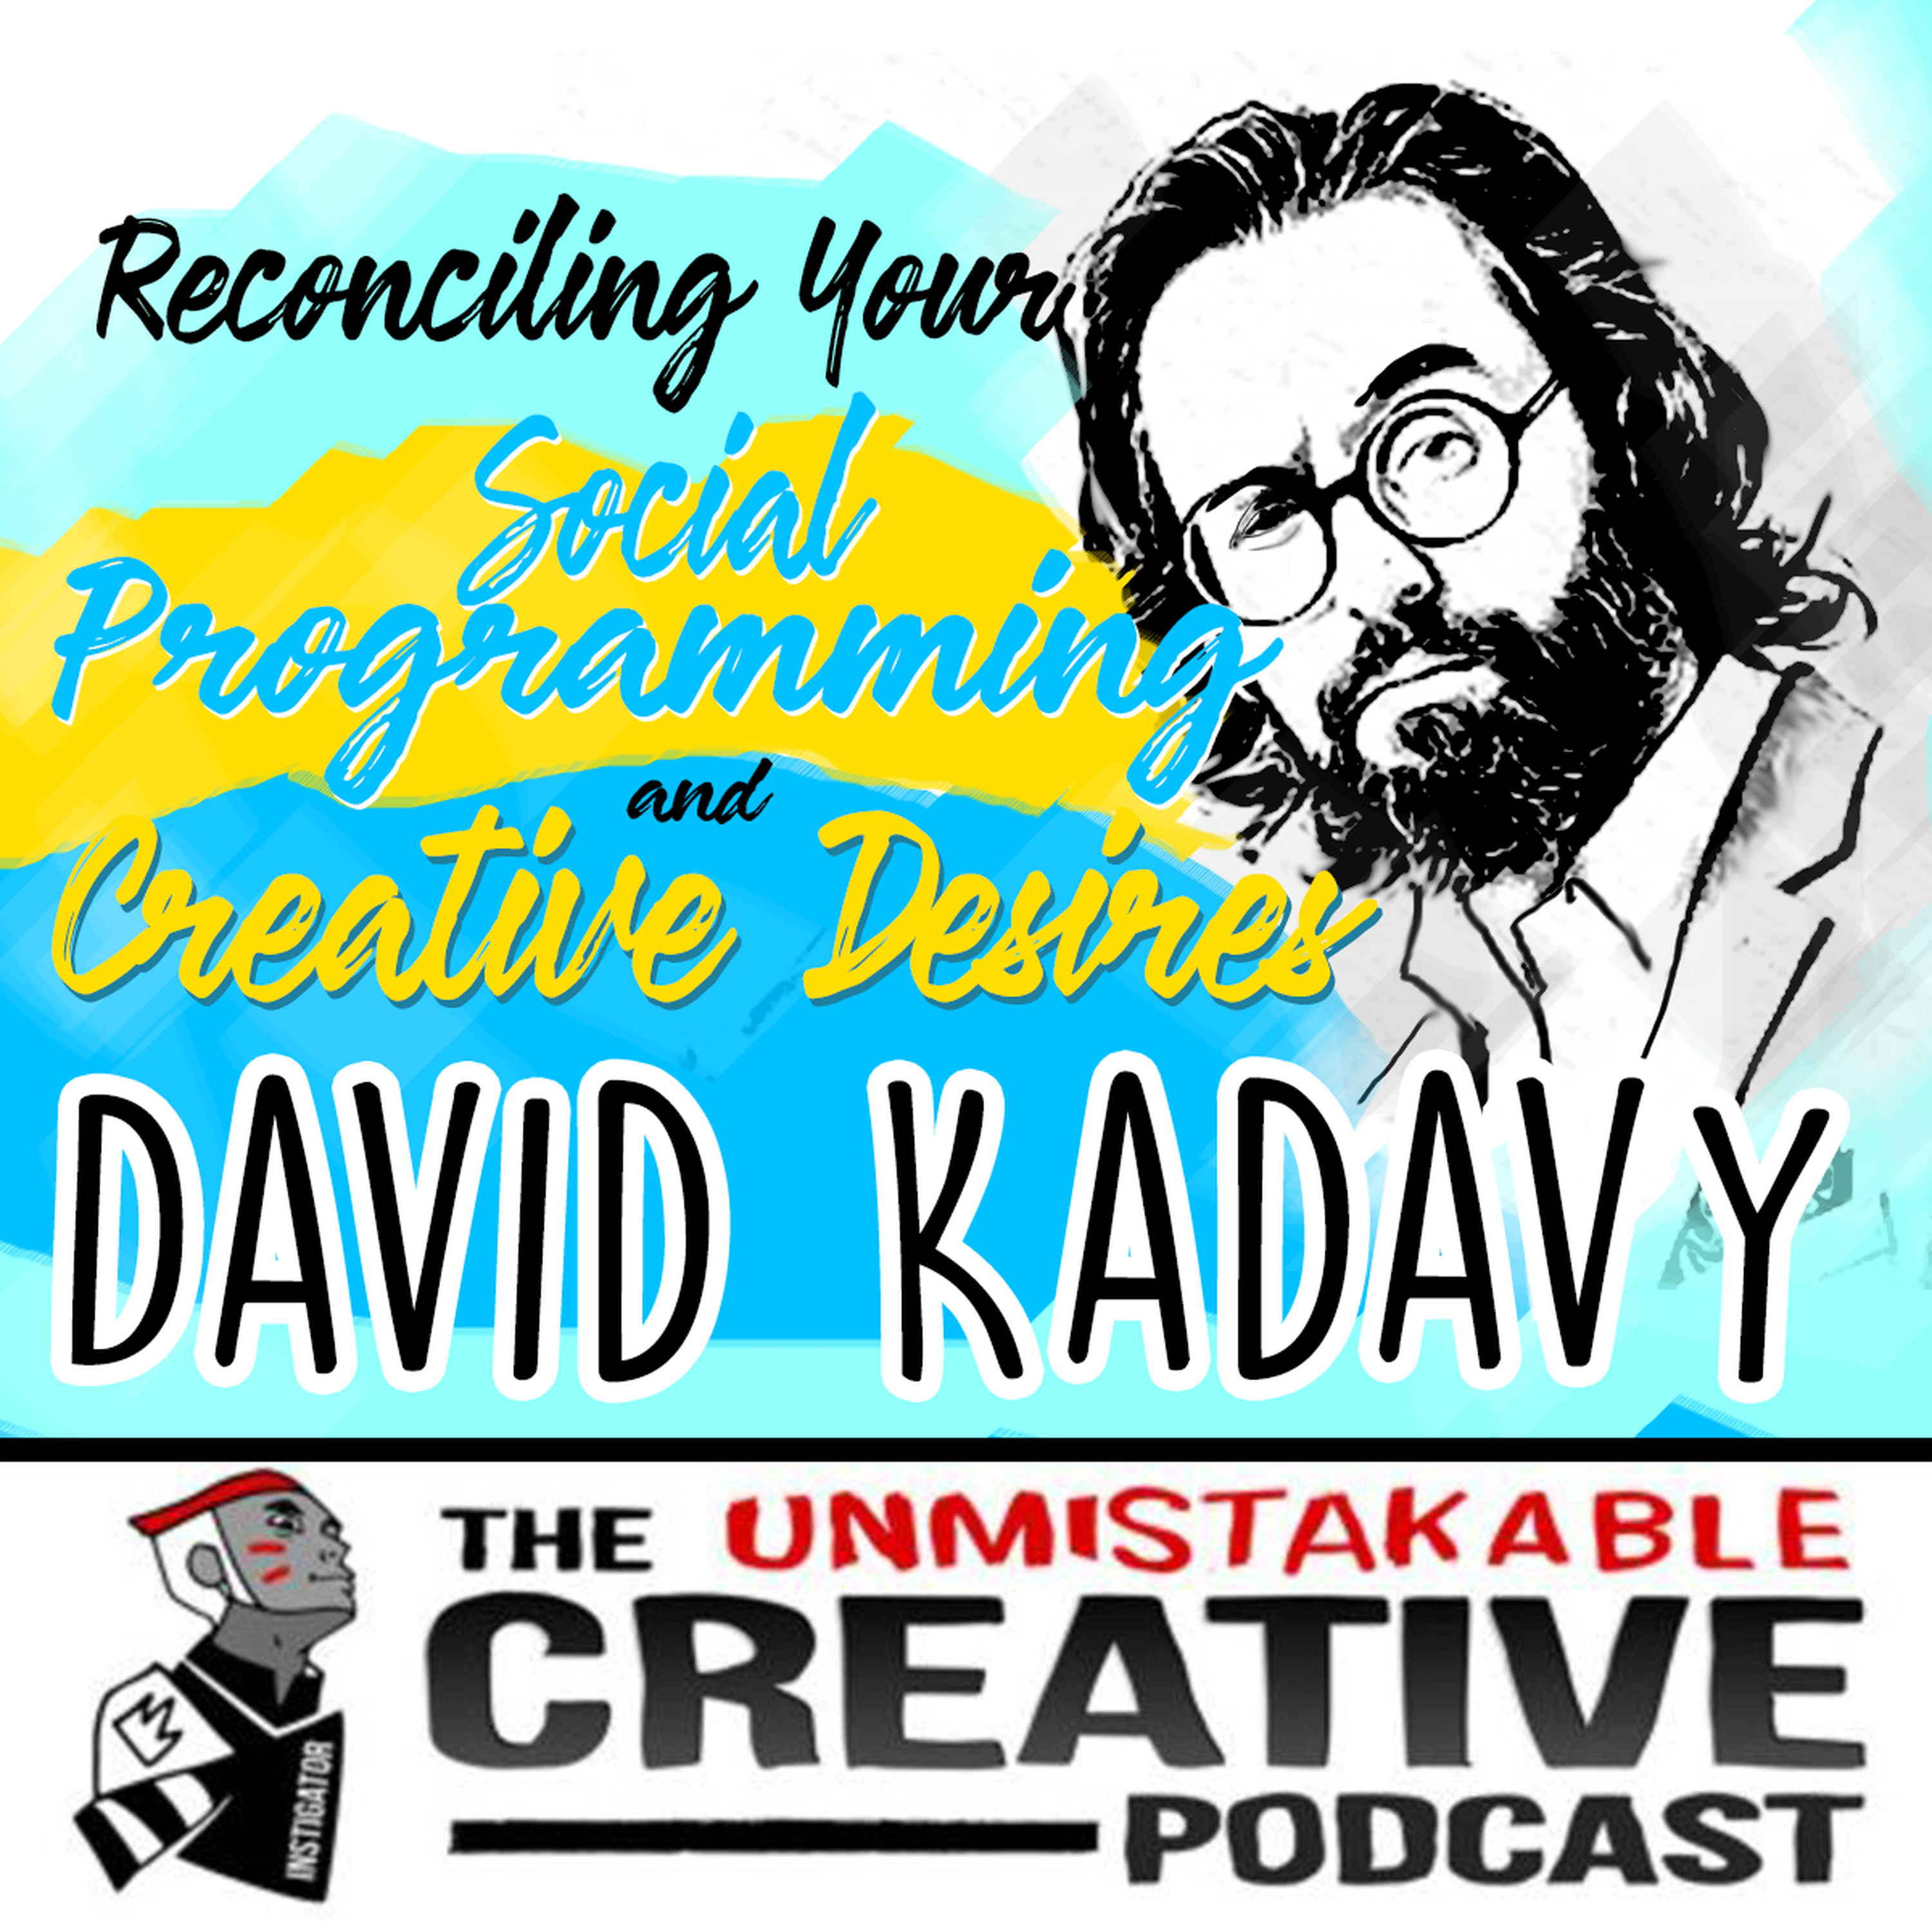 Reconciling Your Social Programming and Creative Desires with David Kadavy Image